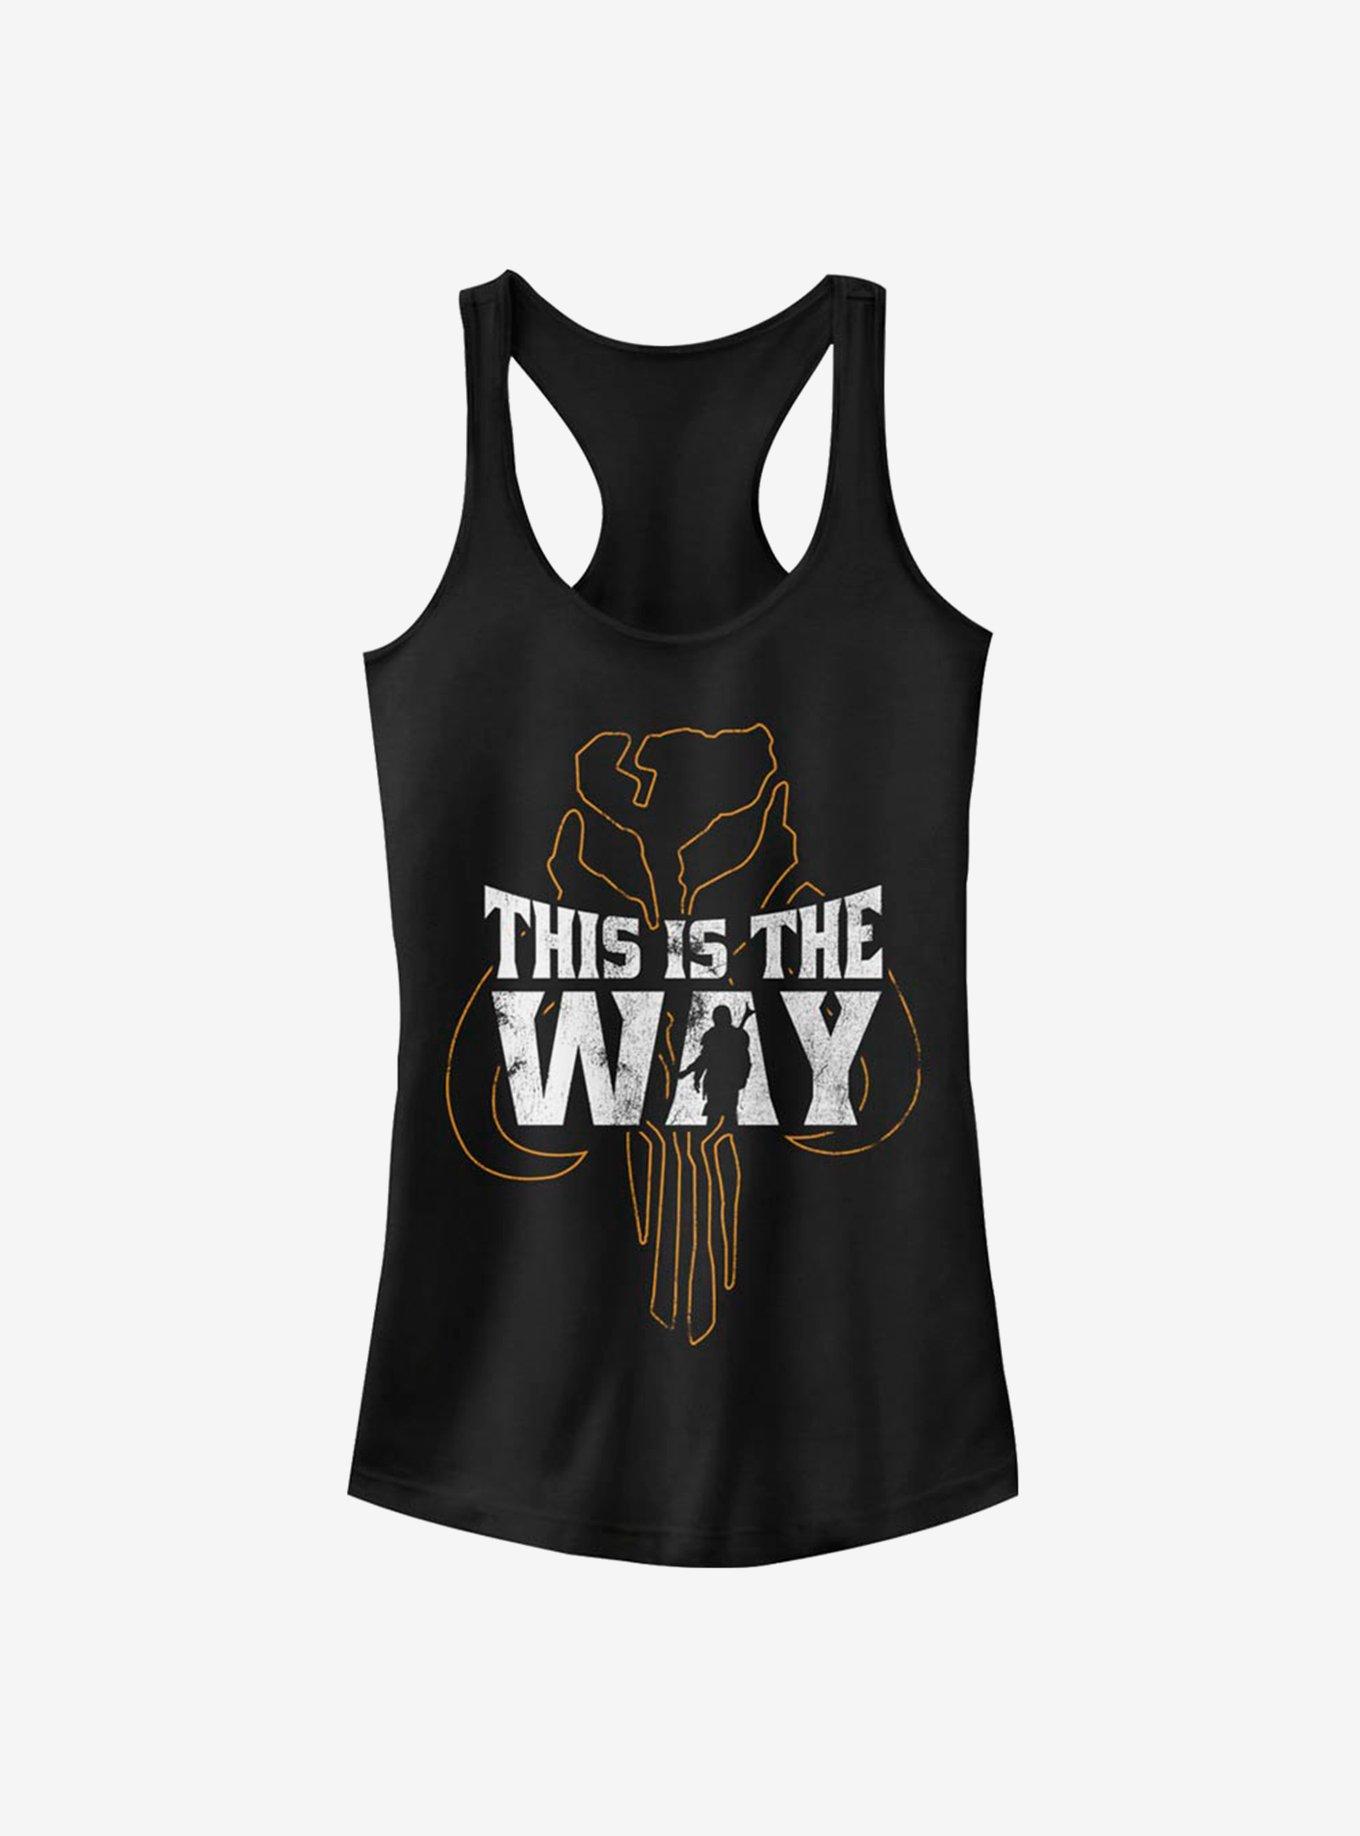 Star Wars The Mandalorian This Is The Way Iron Heart Outline Girls Tank, BLACK, hi-res